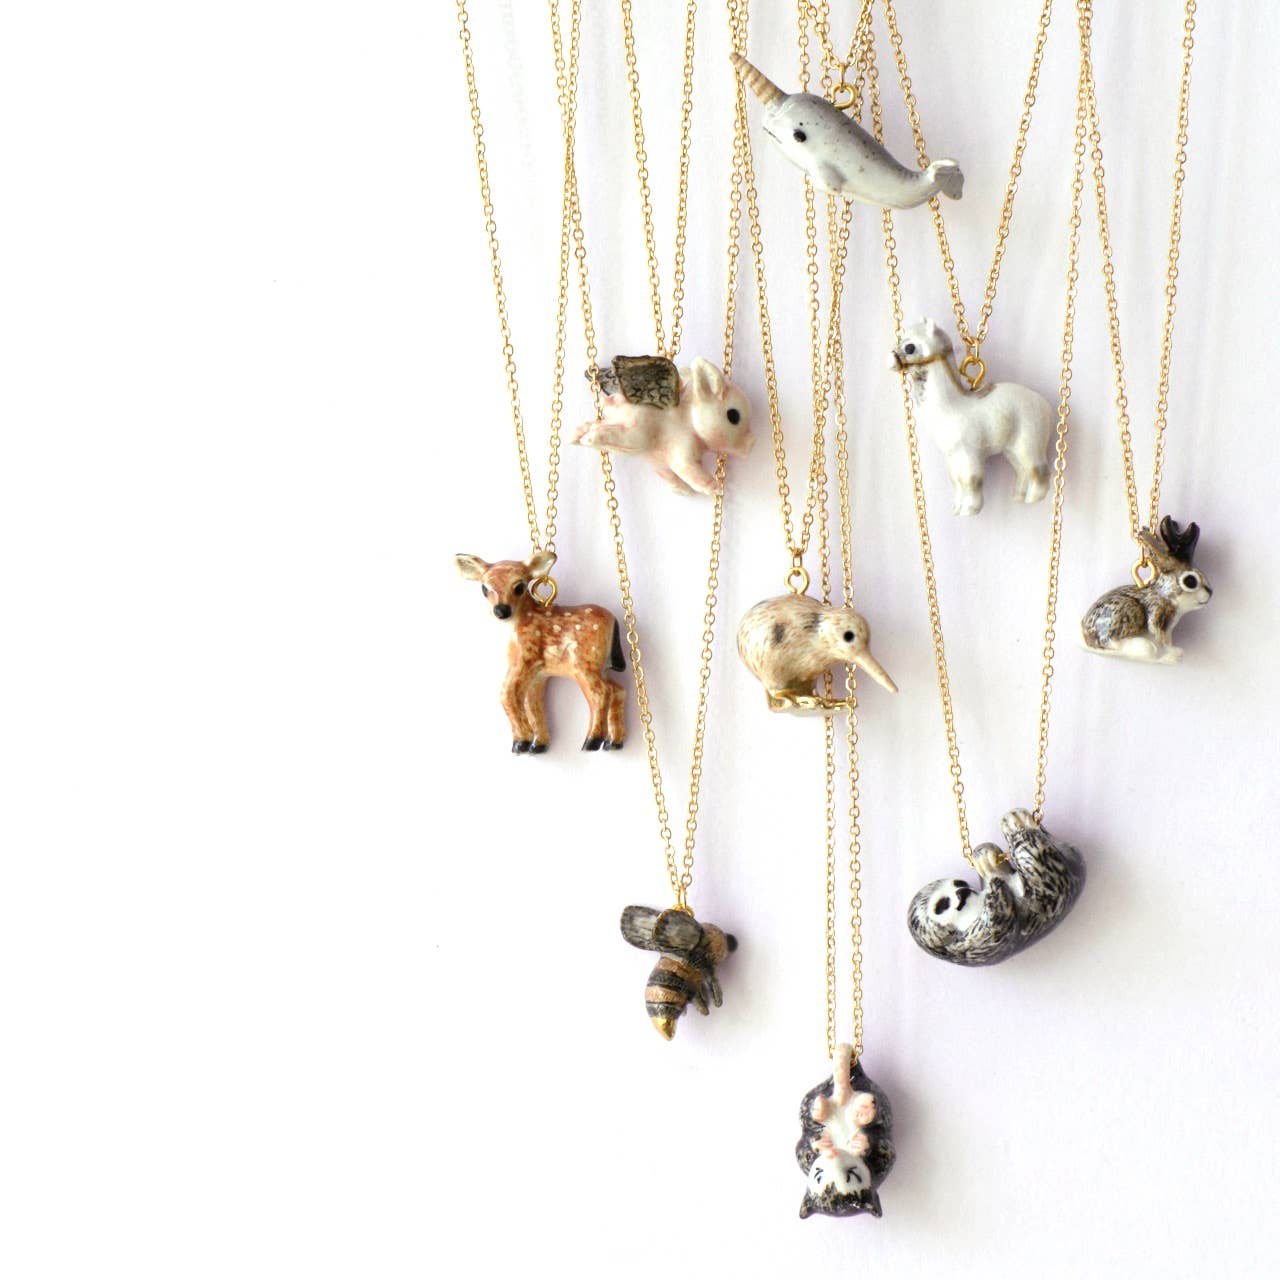 Necklace; Baby Giraffe By Camp Hollow (Hand-Painted Porcelain, 24k Gold Steel Chain)